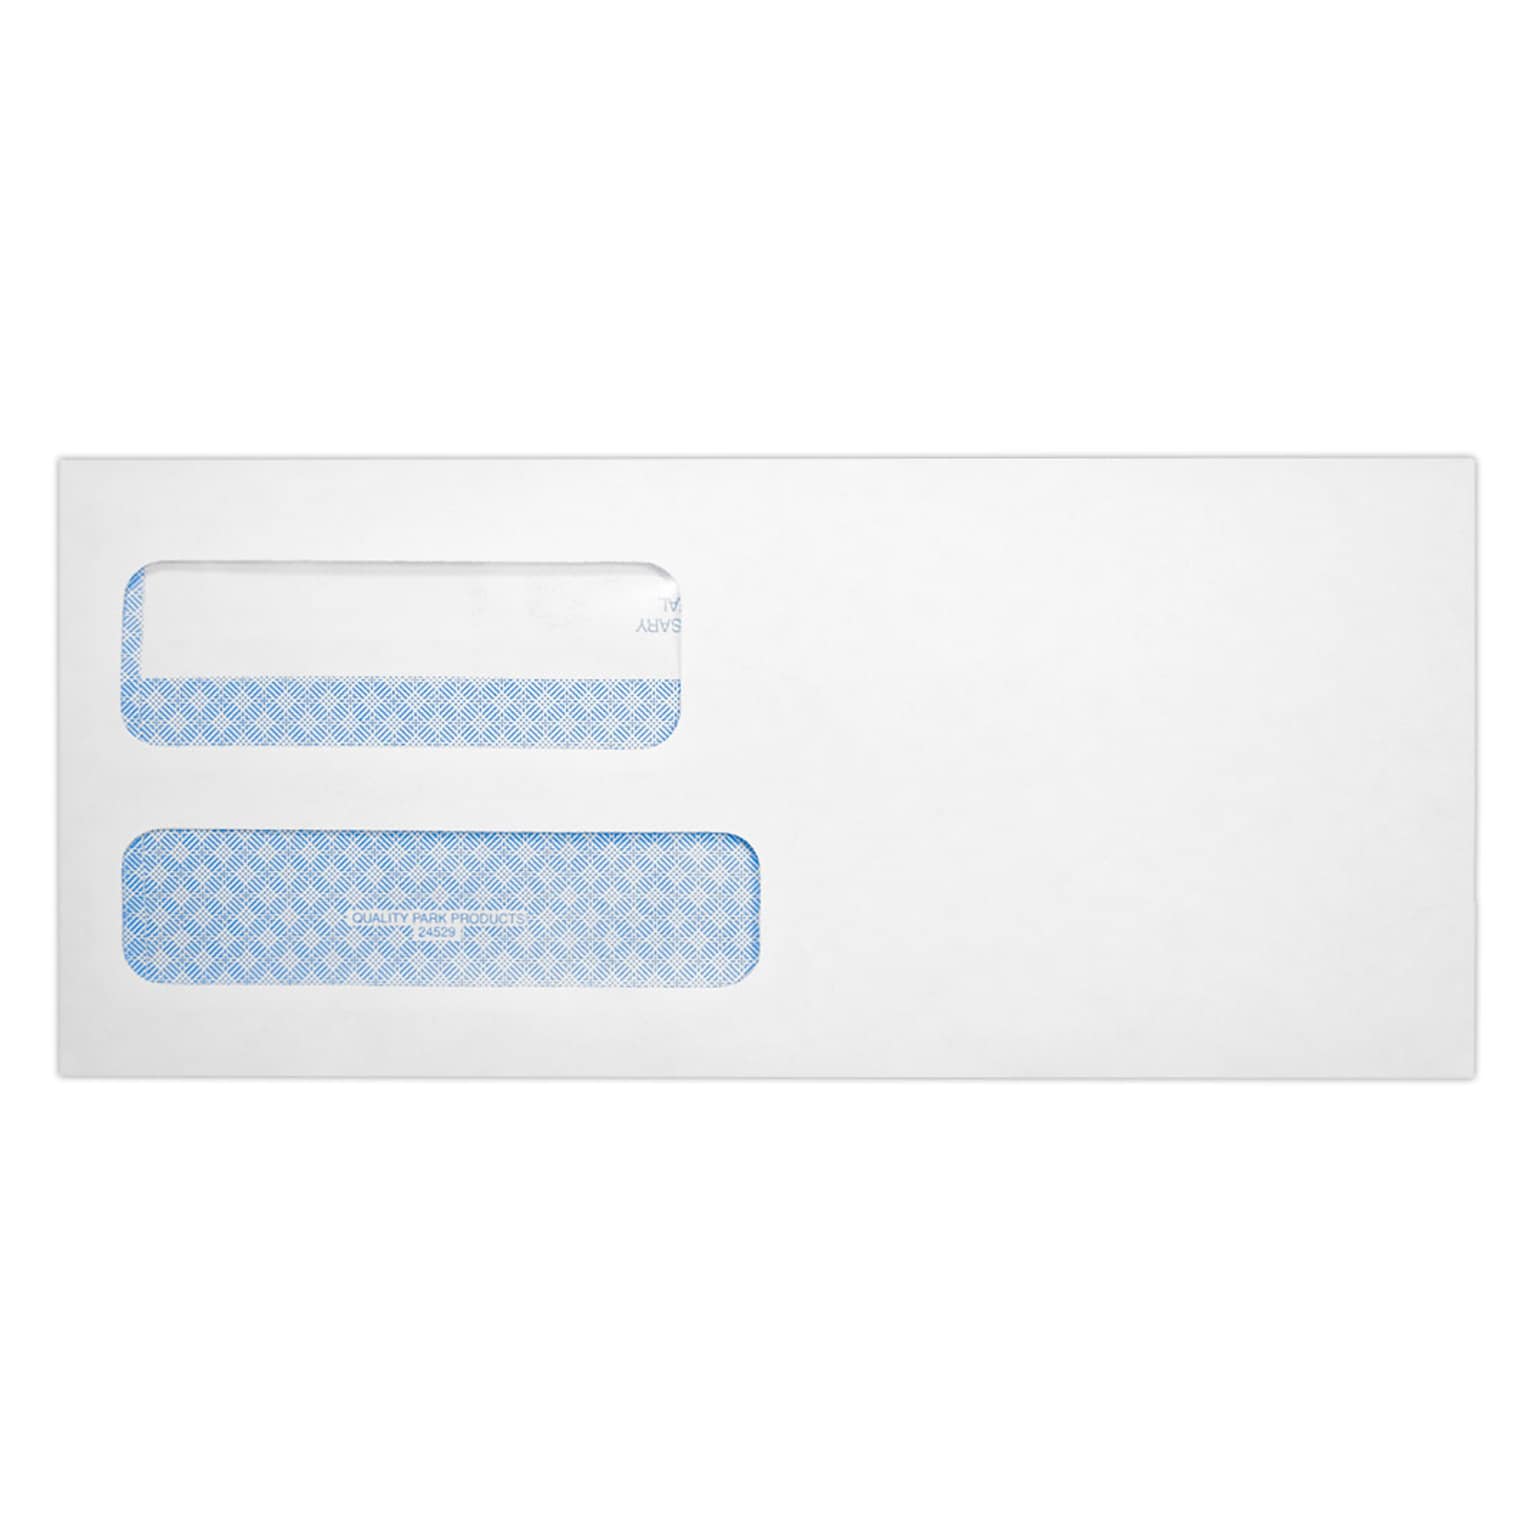 Quality Park Redi-Seal Security Tinted #9 Double Window Envelope, 3 7/8 x 8 13/16, White Wove, 500/Pack (24529-500)